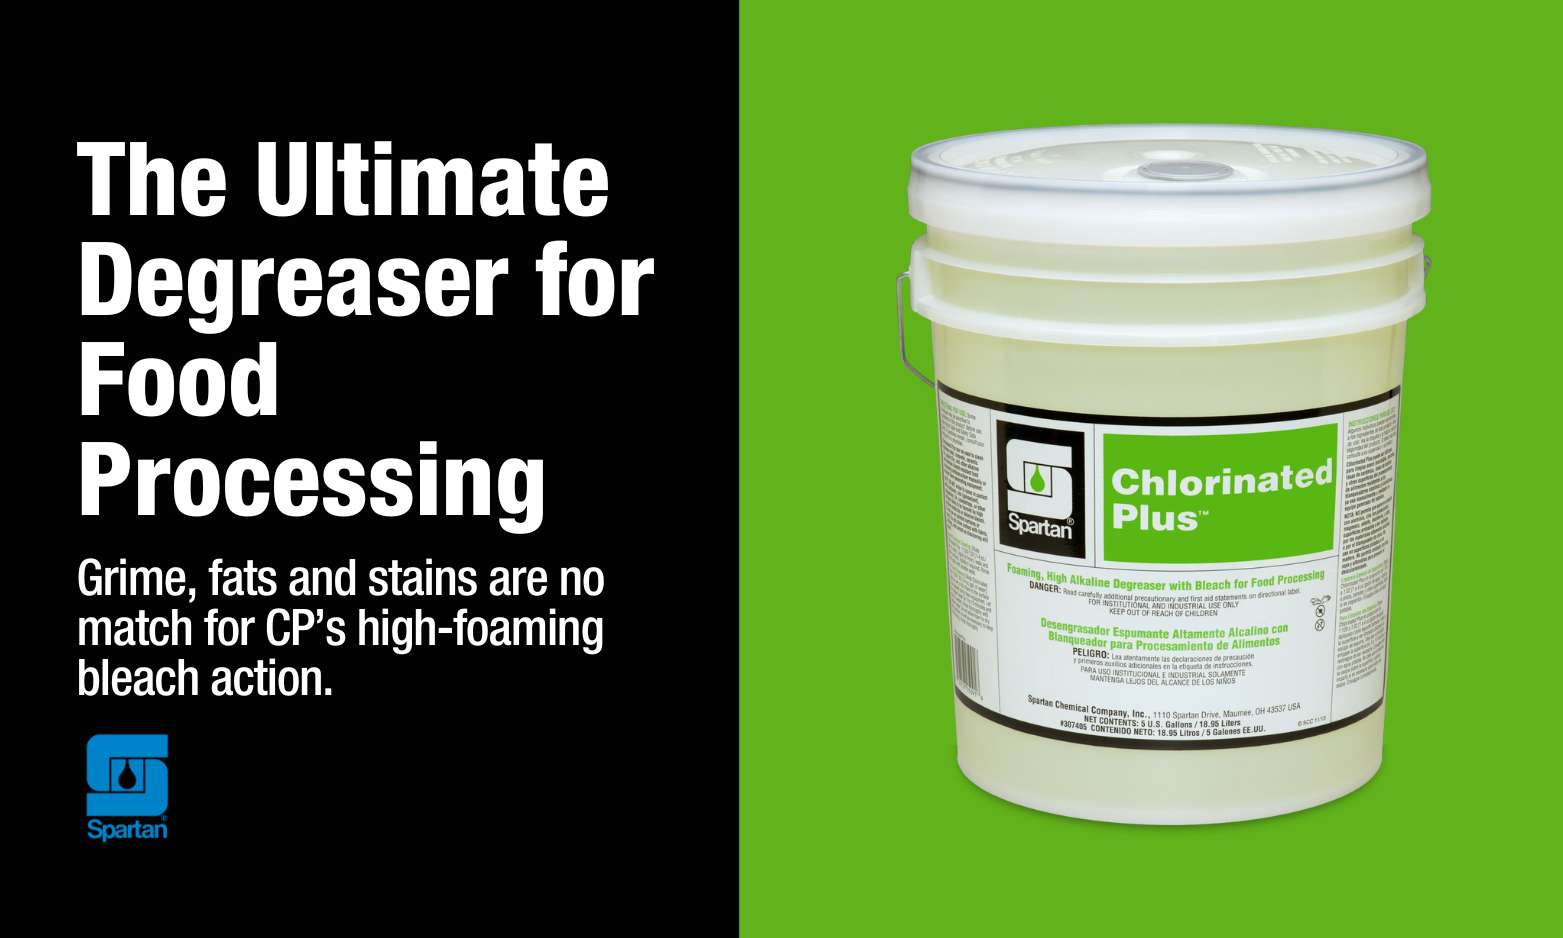 Image shows Spartan Chemical's Chlorinated Plus, a heavy-duty concentrated degreaser for food processing surfaces available at Imperial Dade in Minnesota